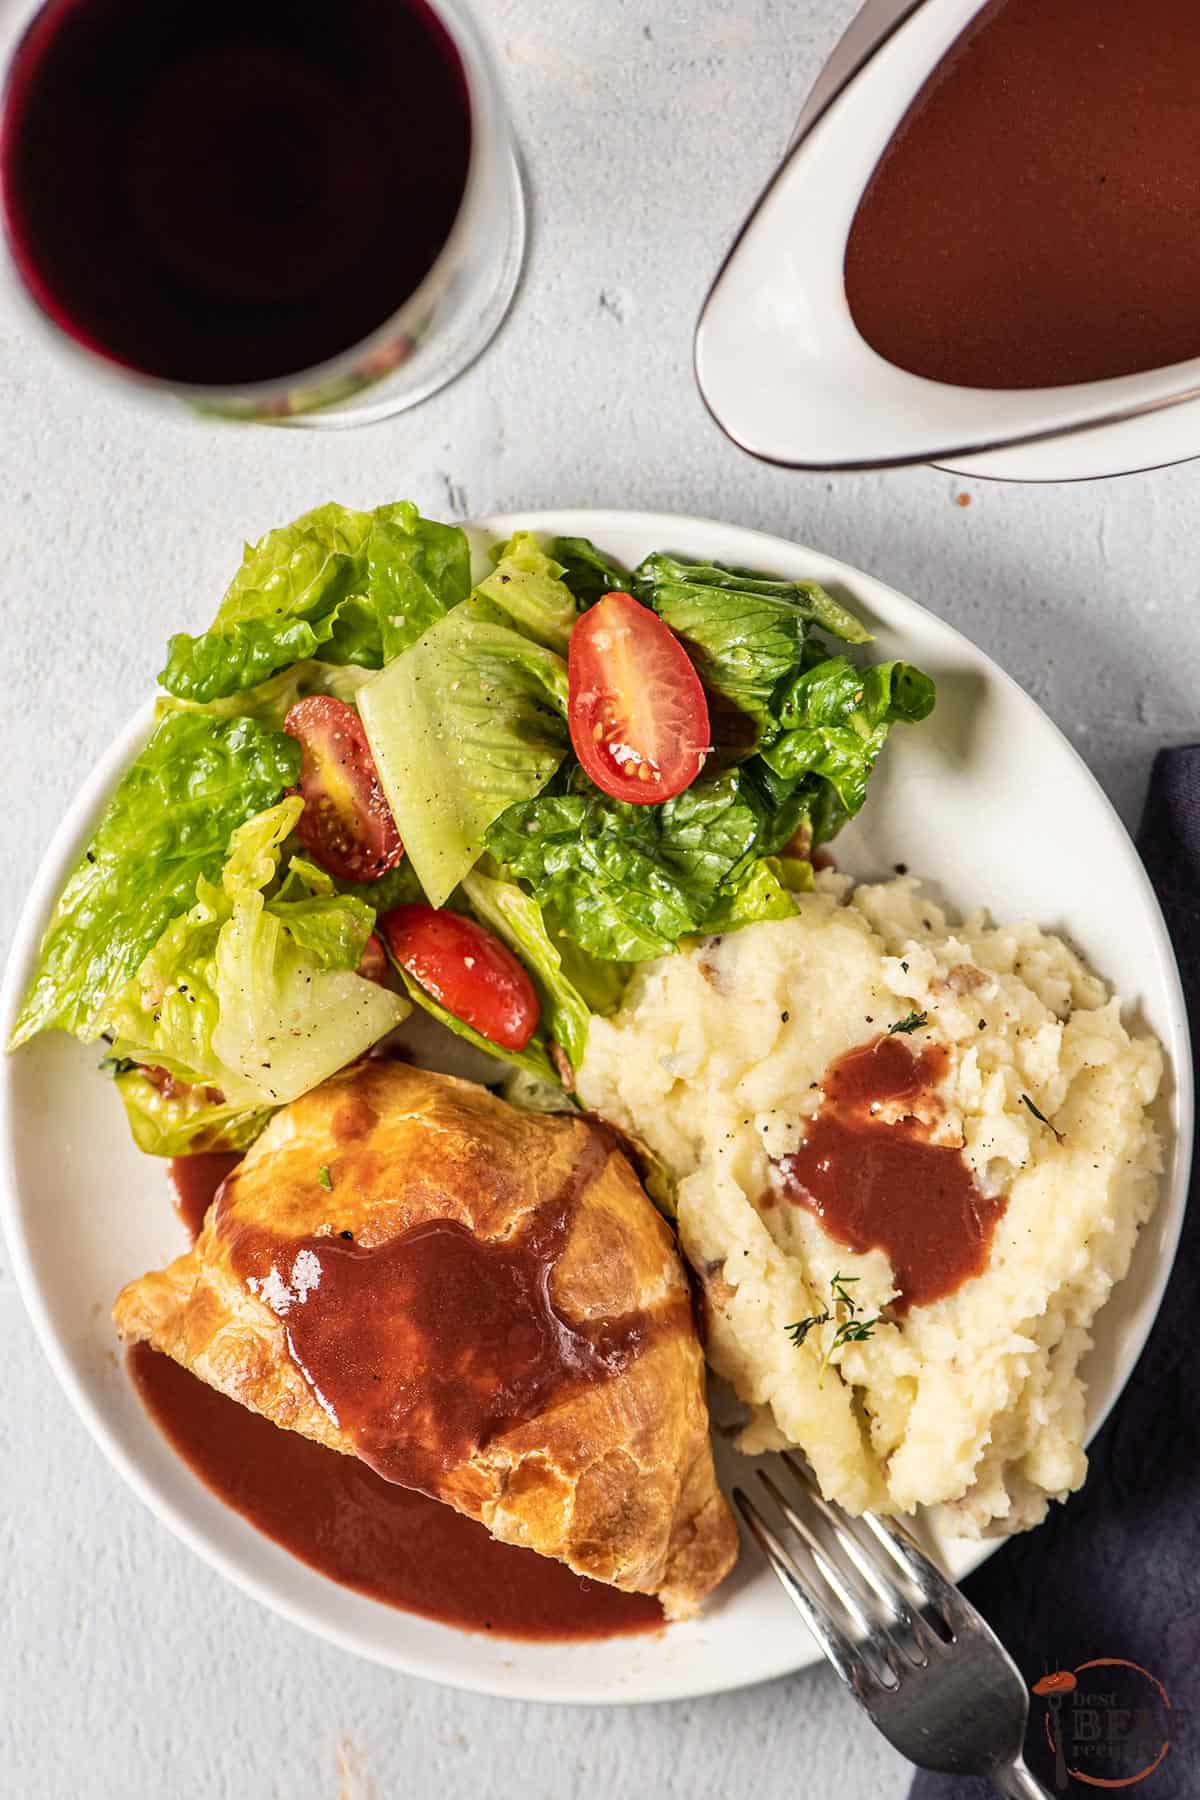 a dinner plate filled with mashed potatoes, salad, and beef wellington, topped with espagnole sauce